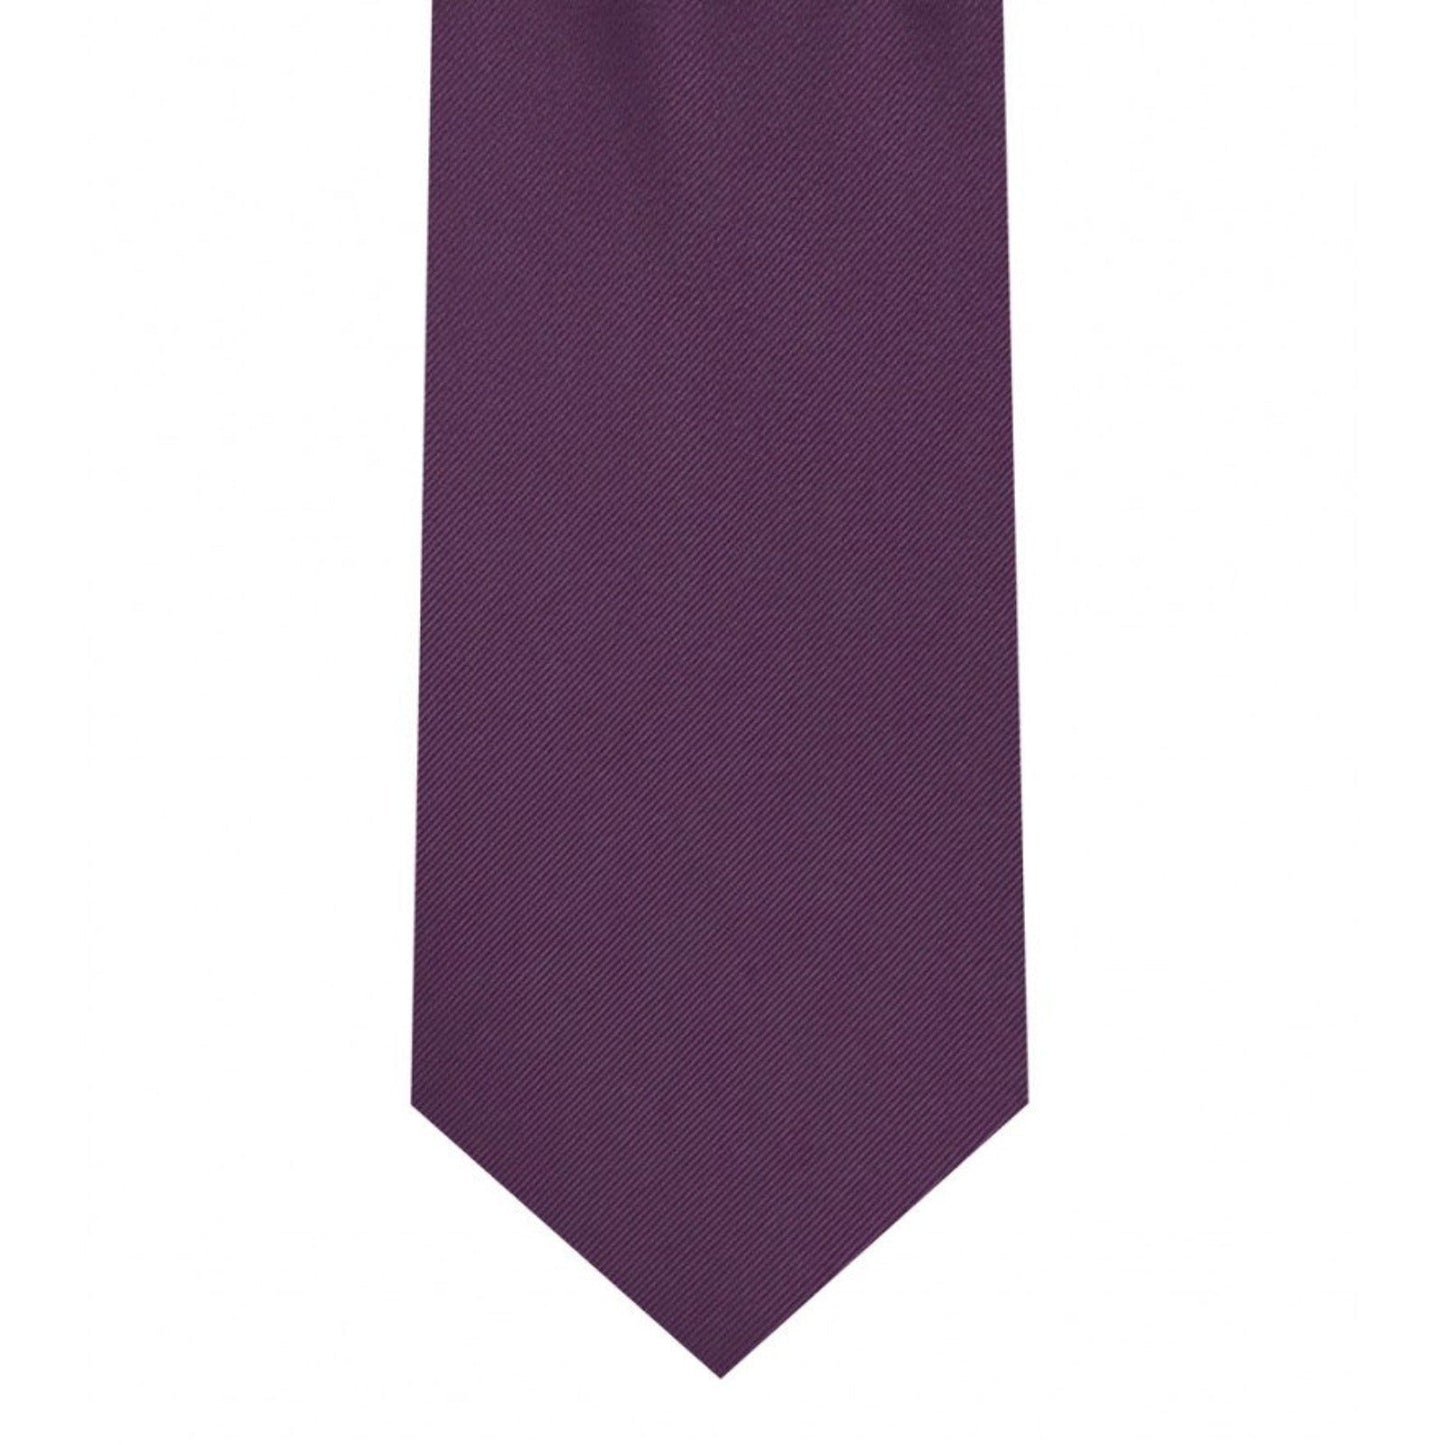 Classic Plum Tie Skinny width 2.75 inches With Matching Pocket Square | KCT Menswear